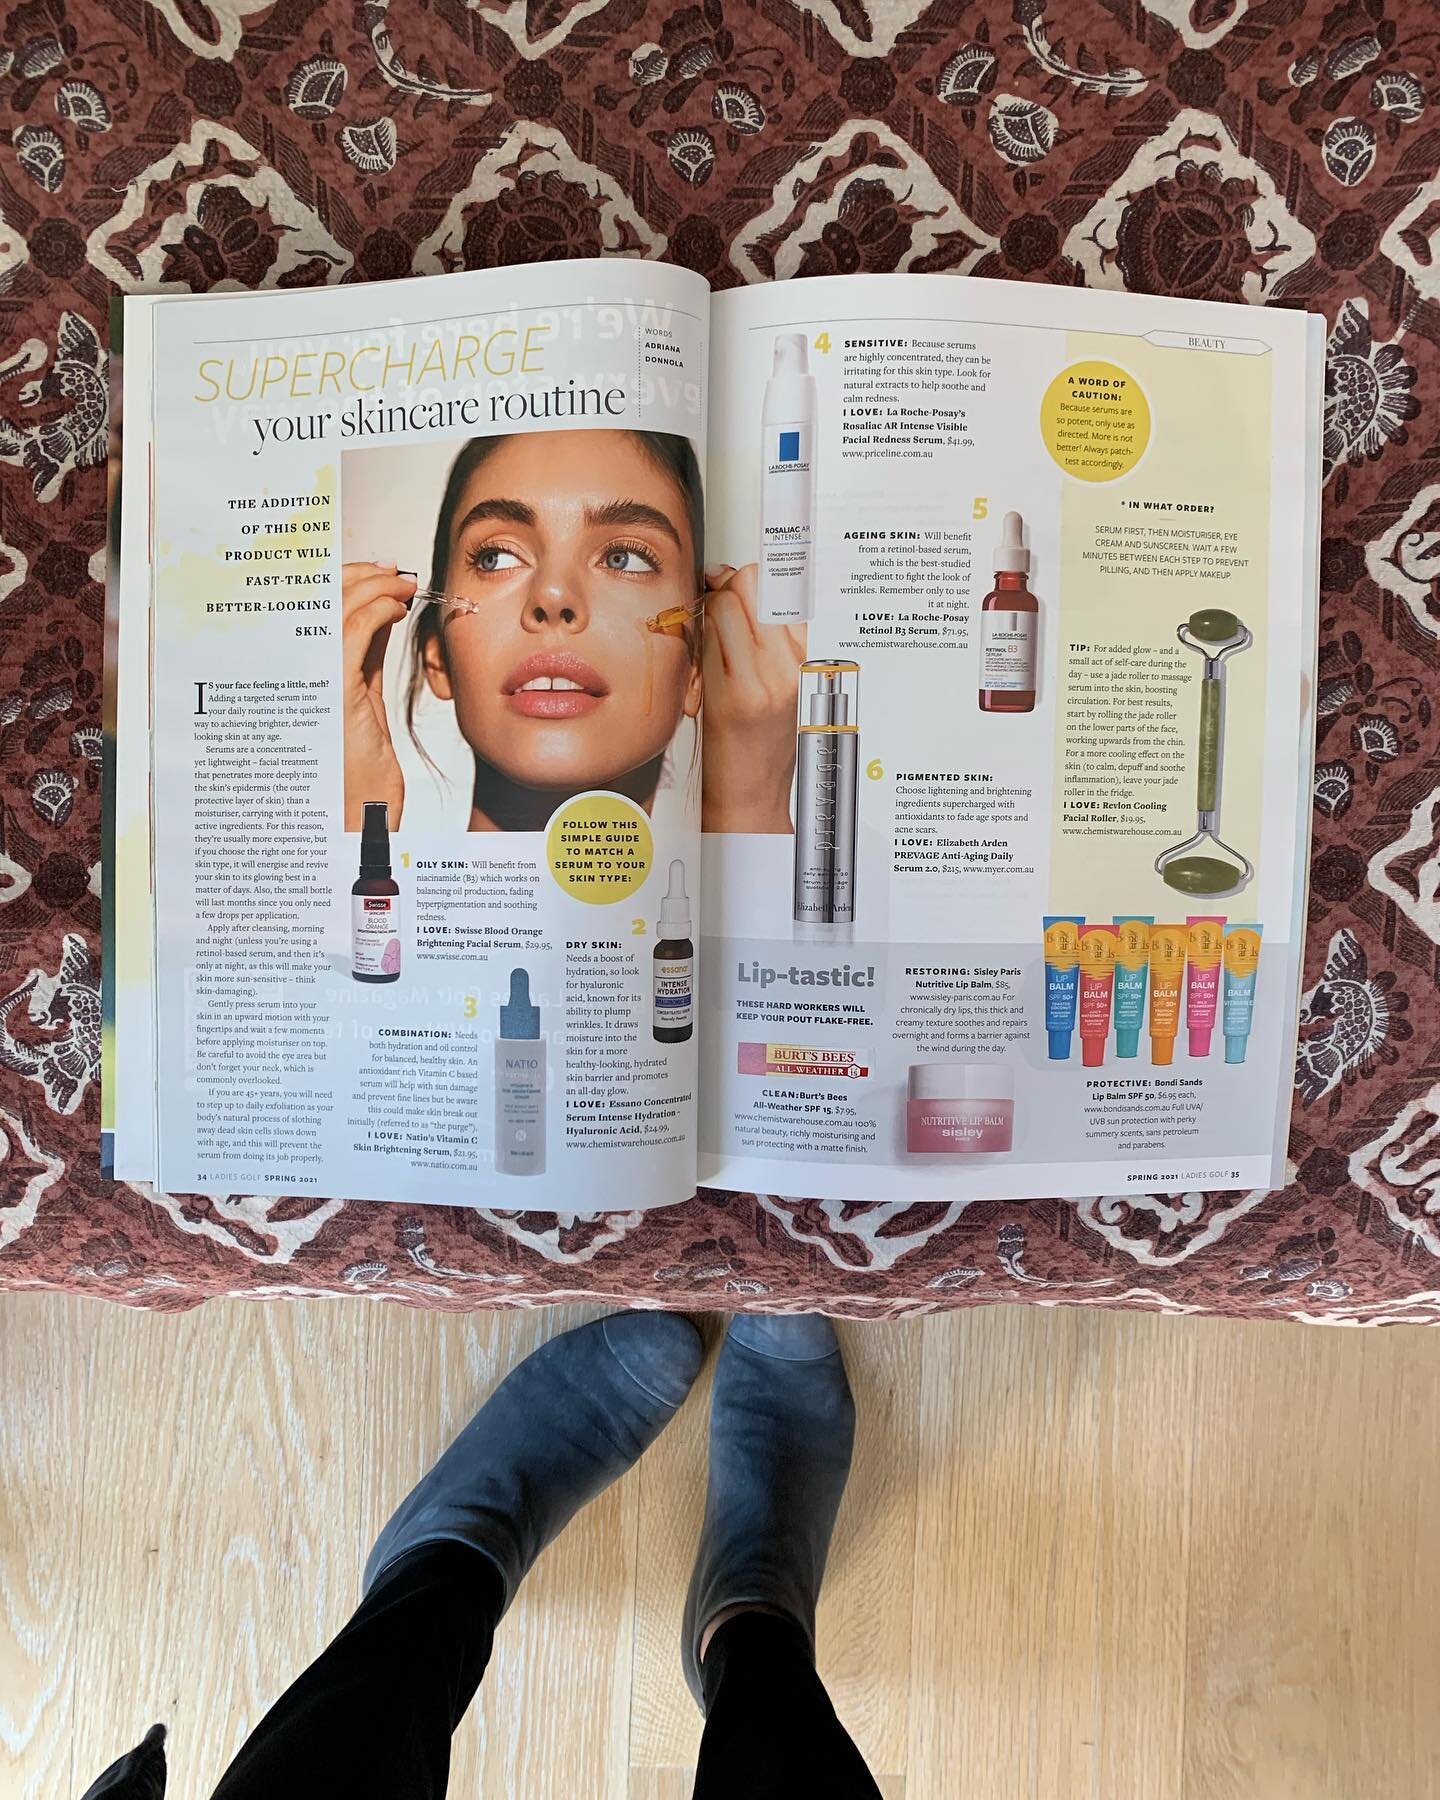 The best serums - for any skin type - plus three fave lip balms in the spring issue of @ladies_golf_aus magazine 🏌🏻&zwj;♀️💋⛳️
.
.
.
.
.
#golfbeauty #ladieswhoplaygolf #skincareroutine #golfforwomen #golf